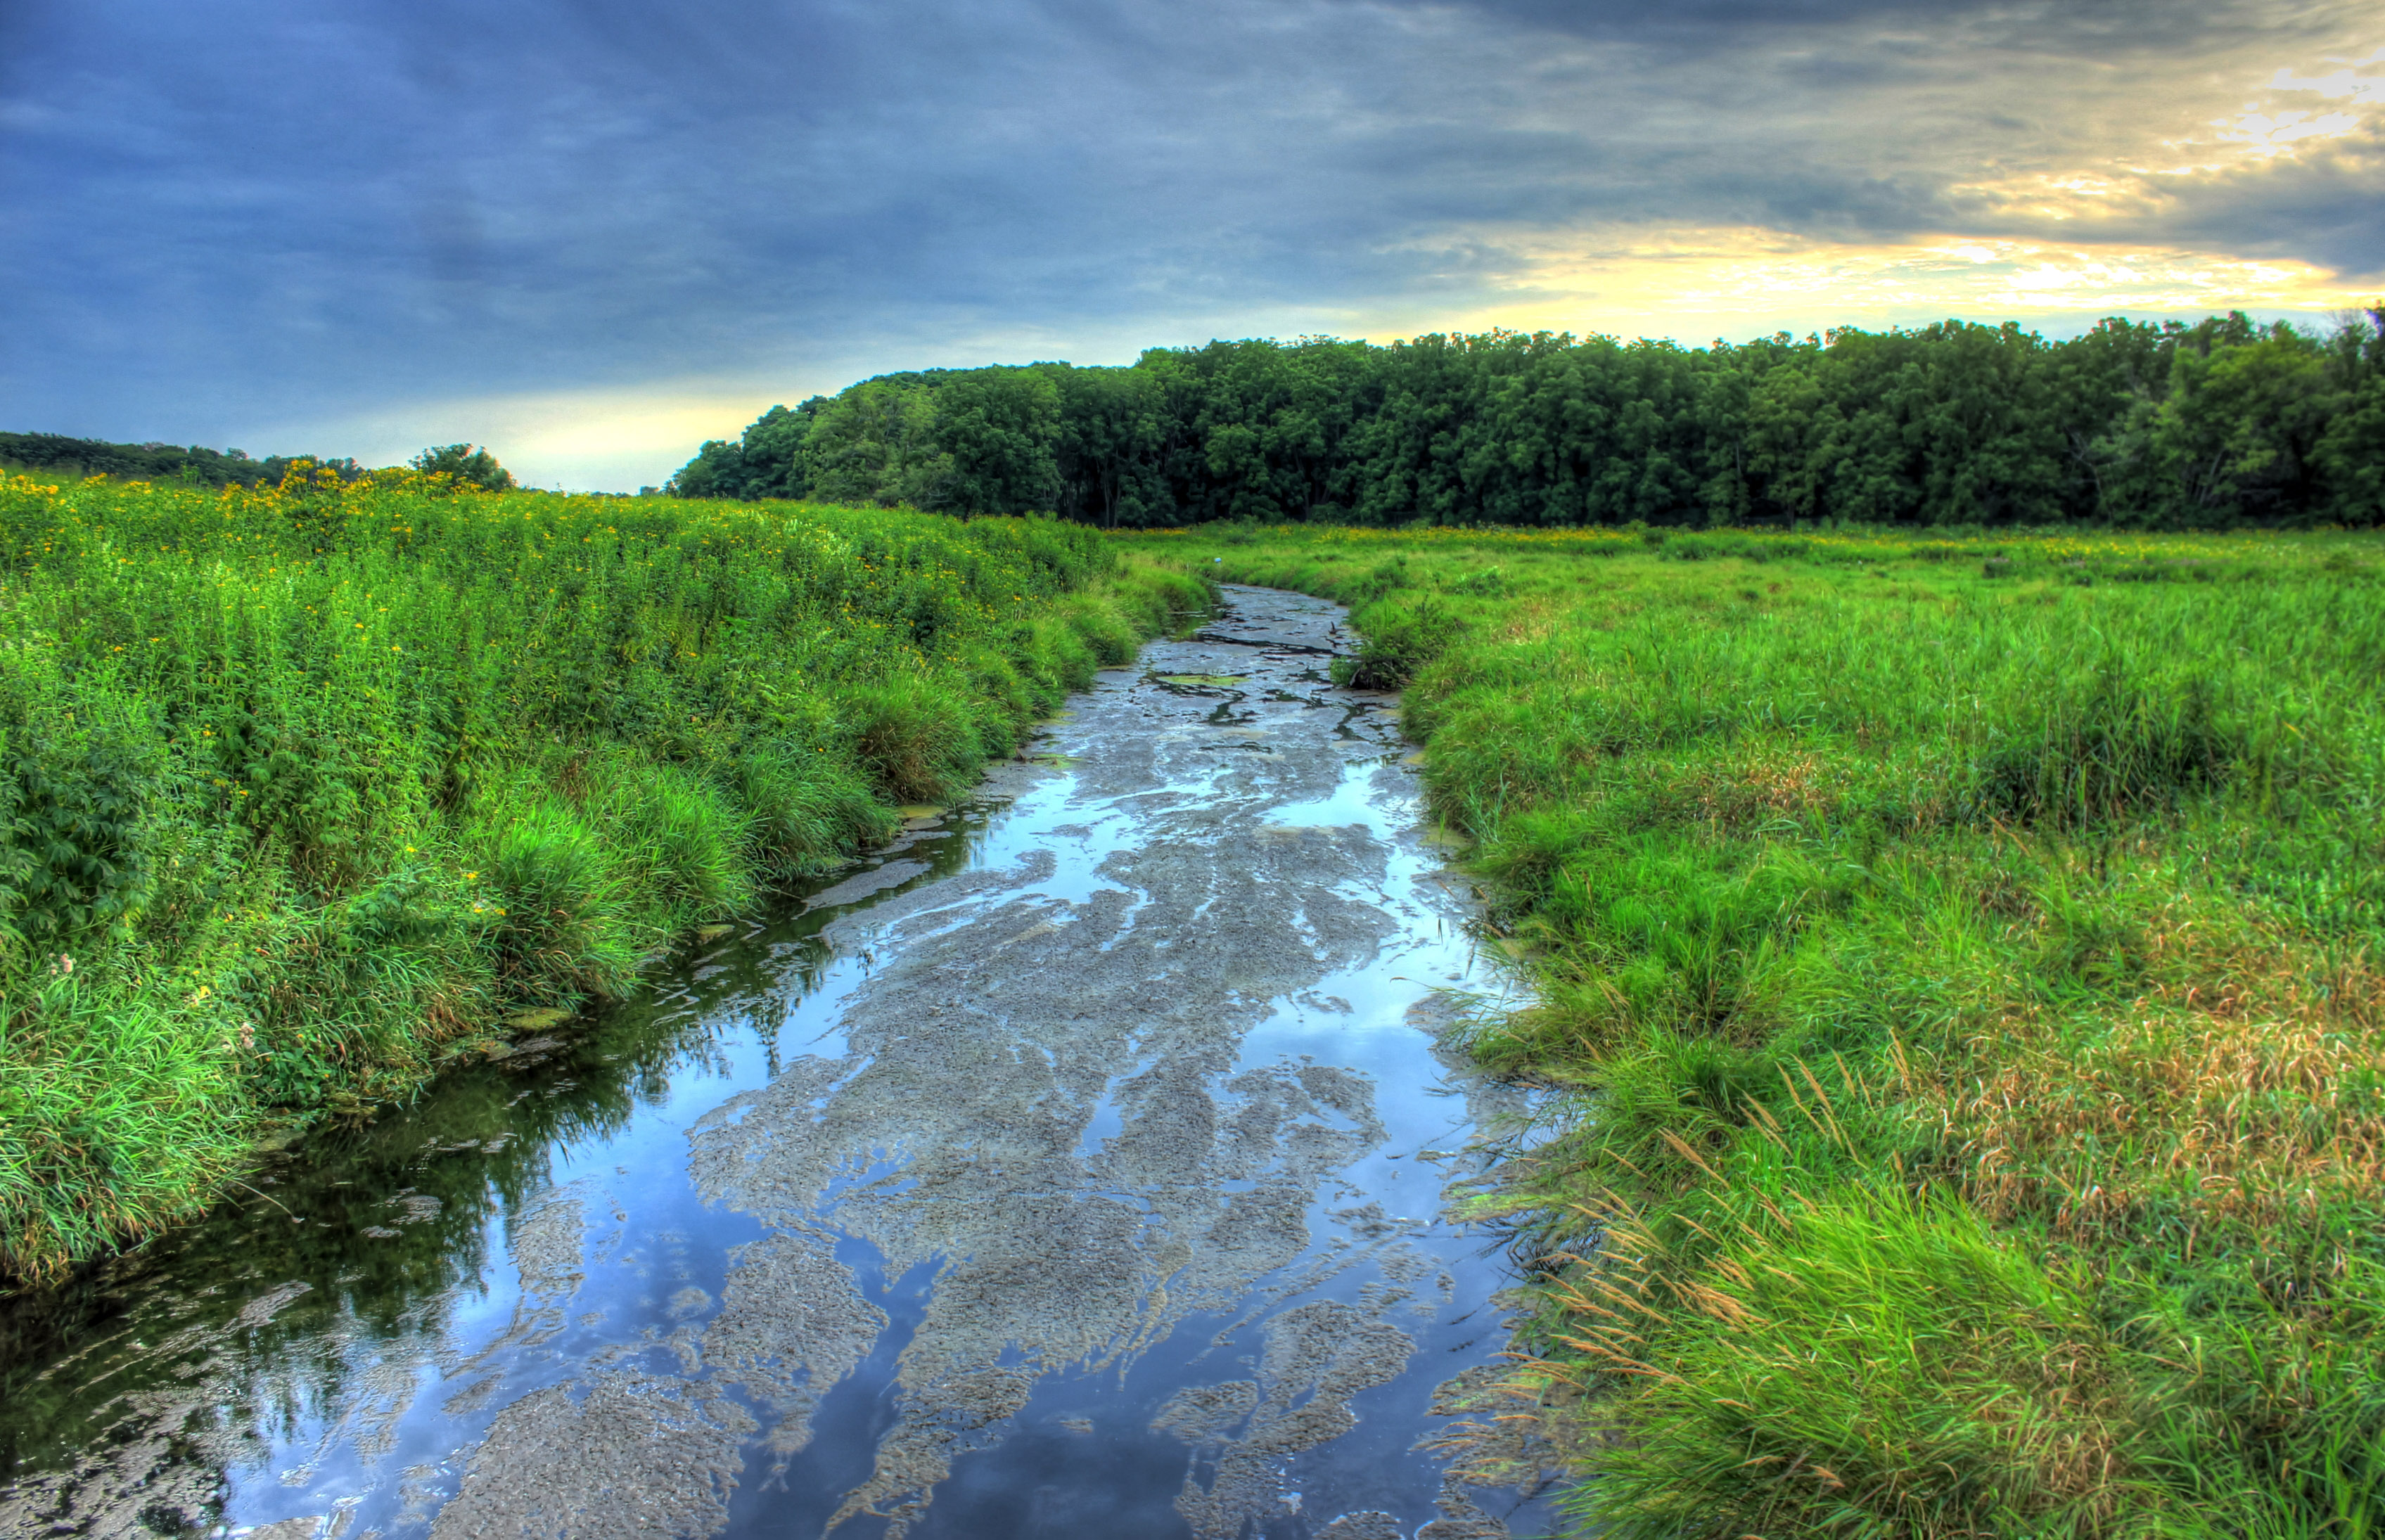 The stream in the natural area in Madison, Wisconsin image - Free ...